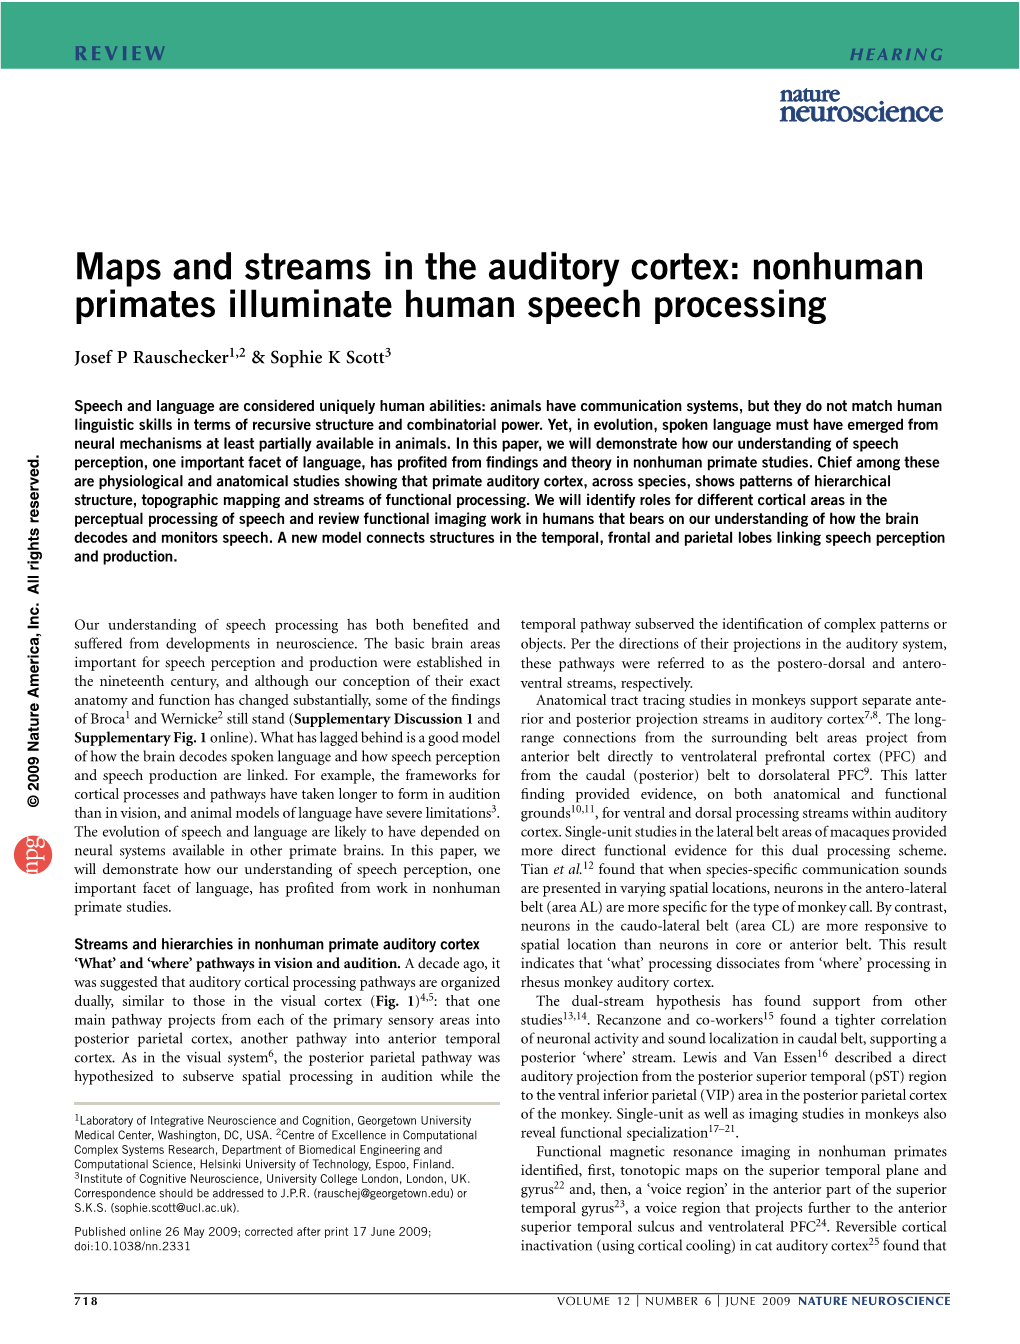 Maps and Streams in the Auditory Cortex: Nonhuman Primates Illuminate Human Speech Processing